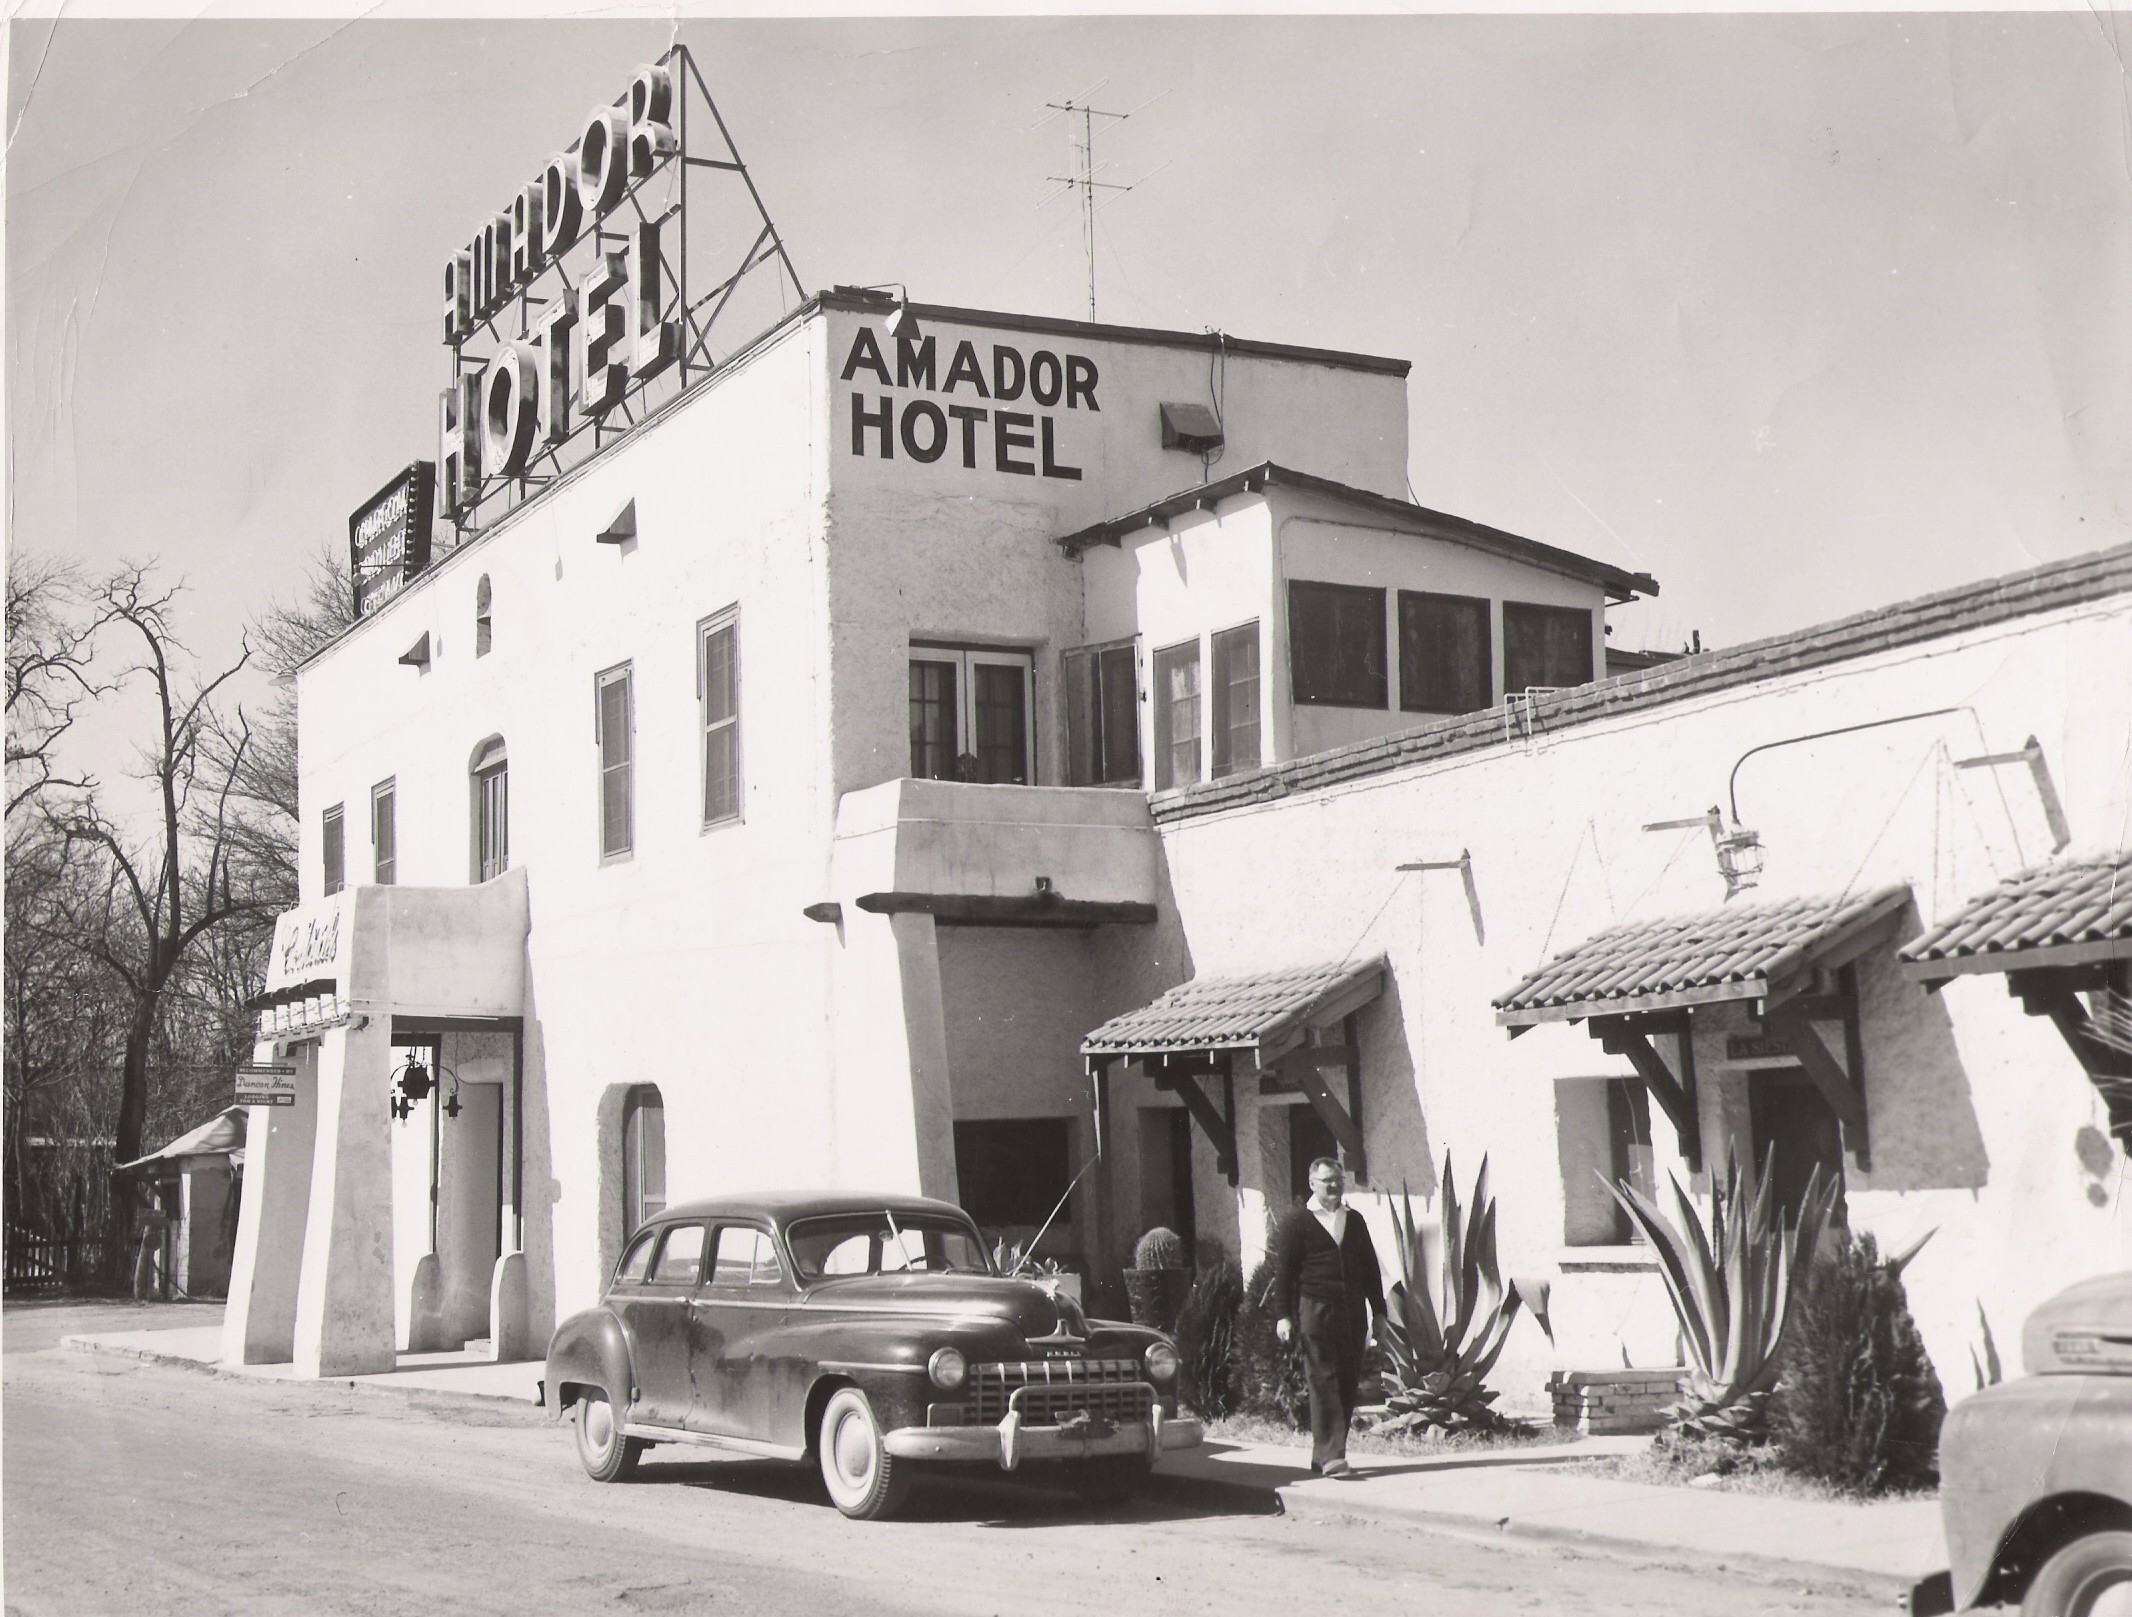 Amador Hotel, late 1940s